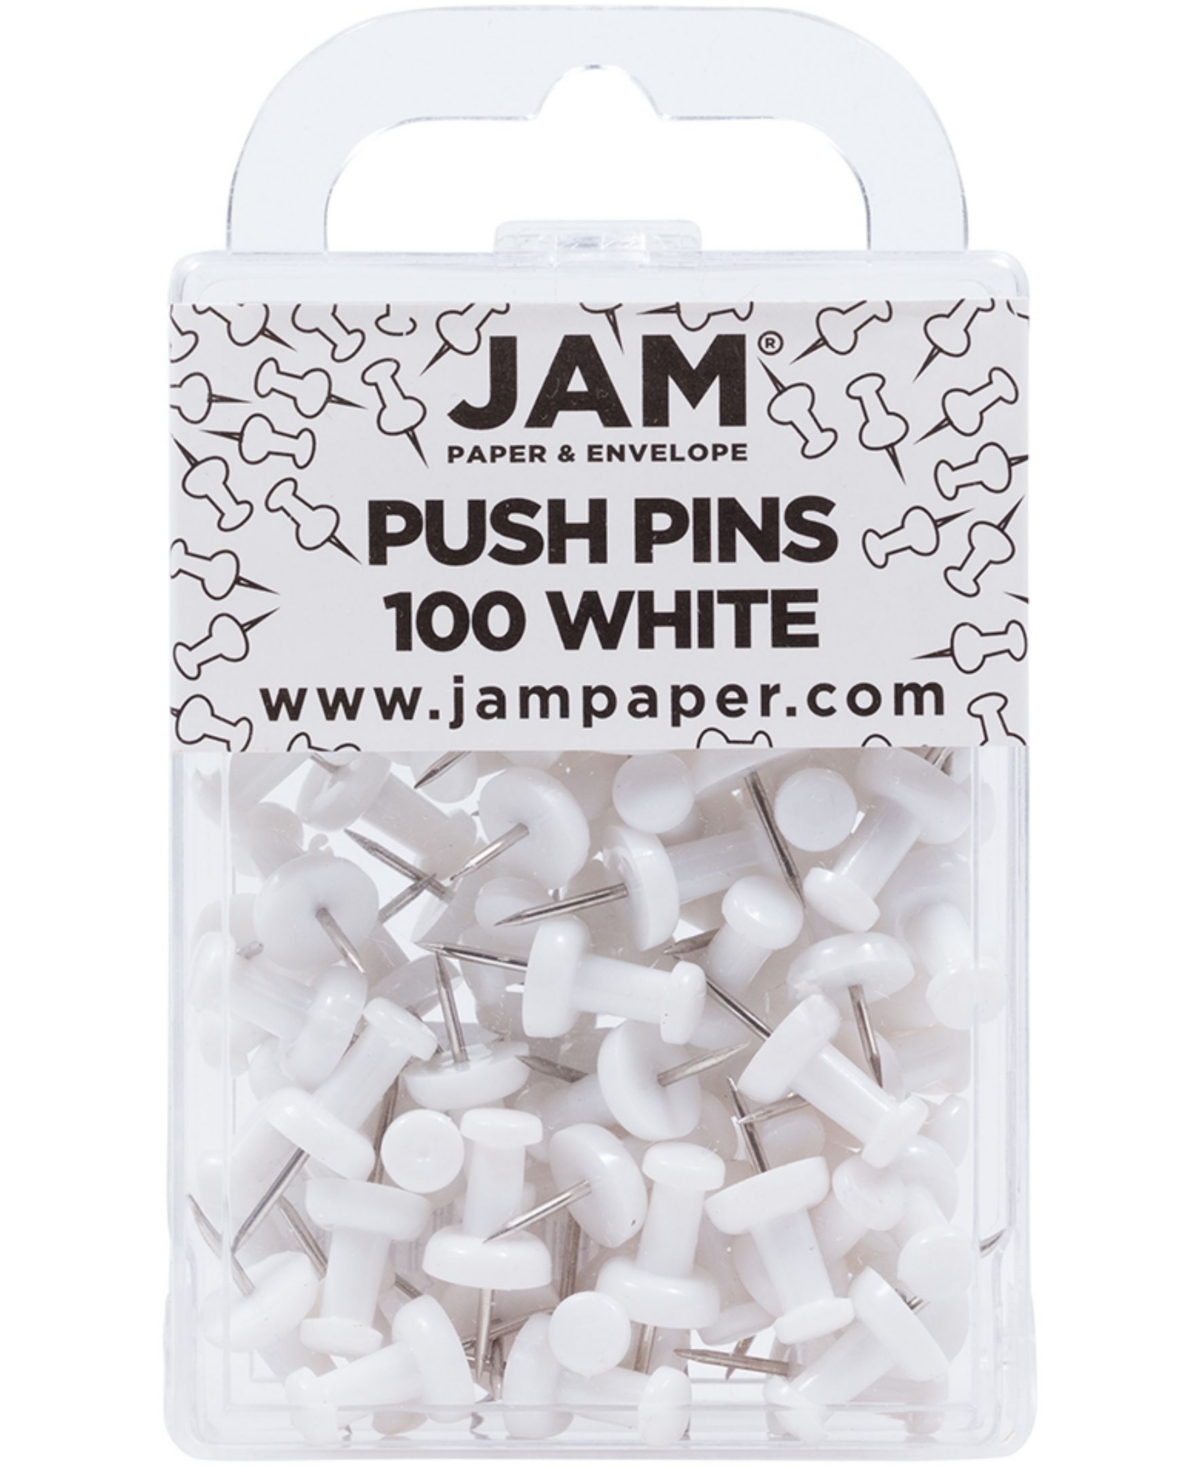 Jam Paper Colorful Push Pins In White